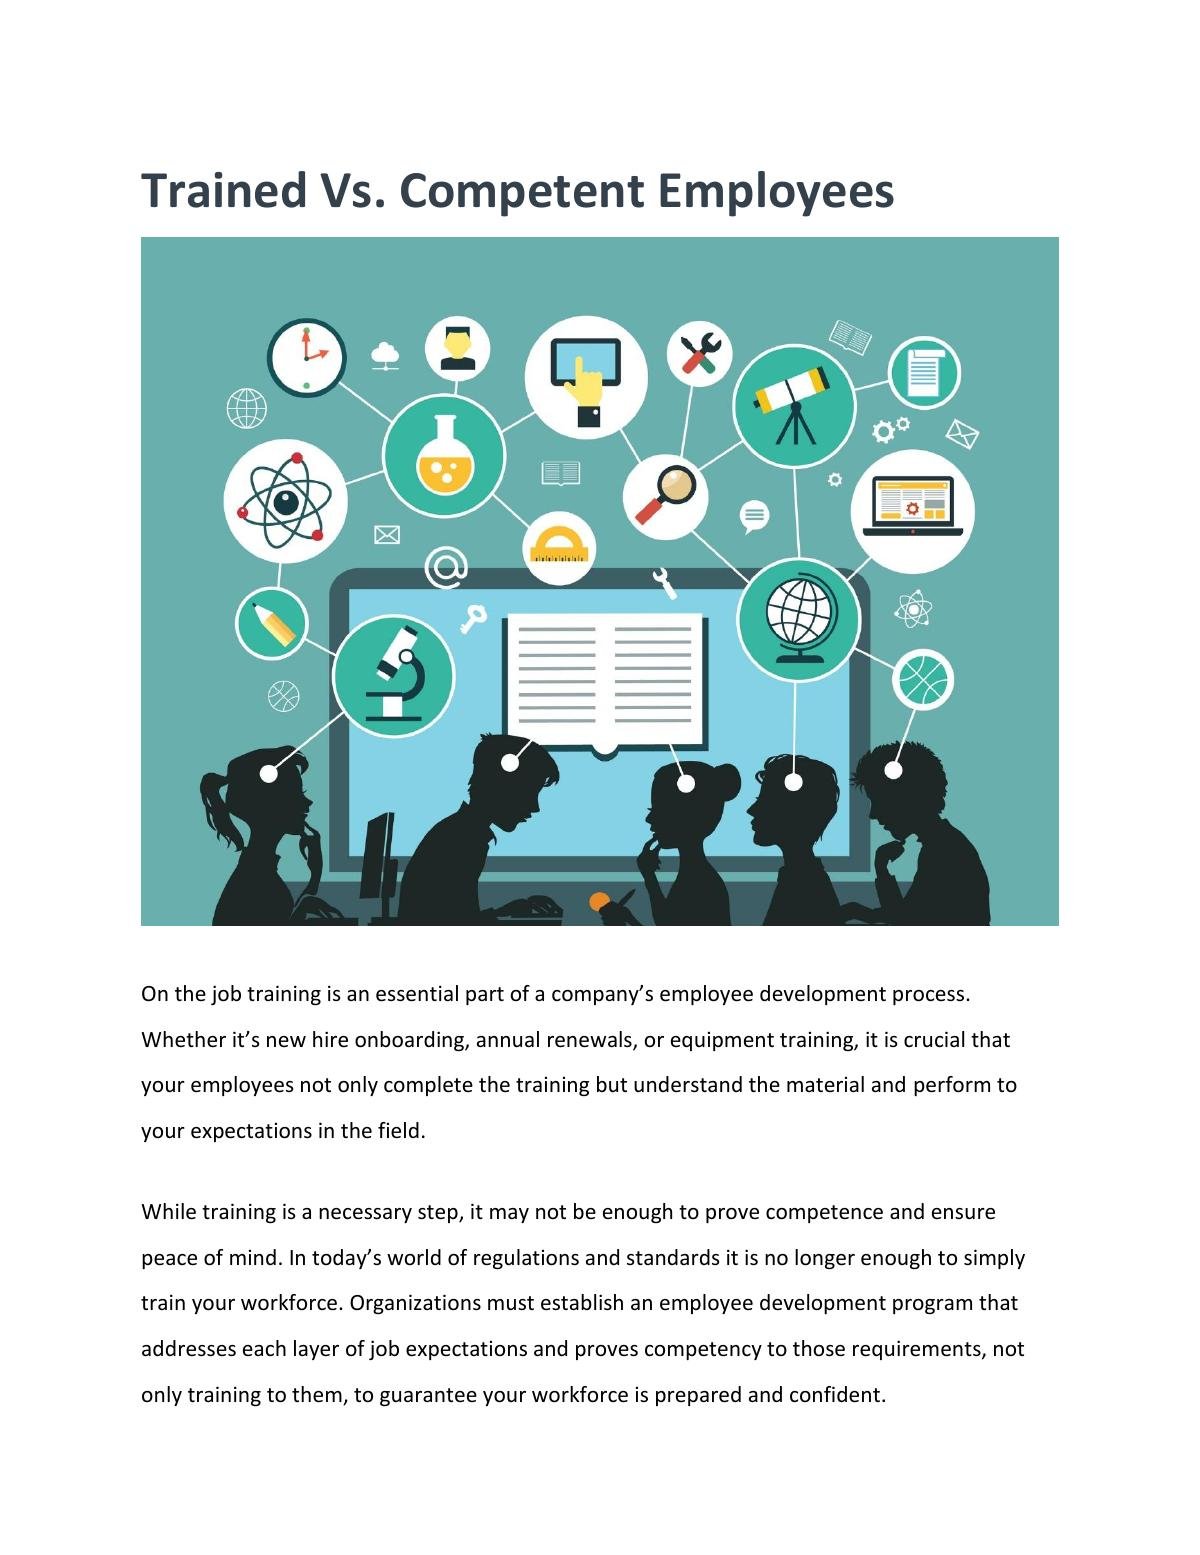 Trained Vs. Competent Employees